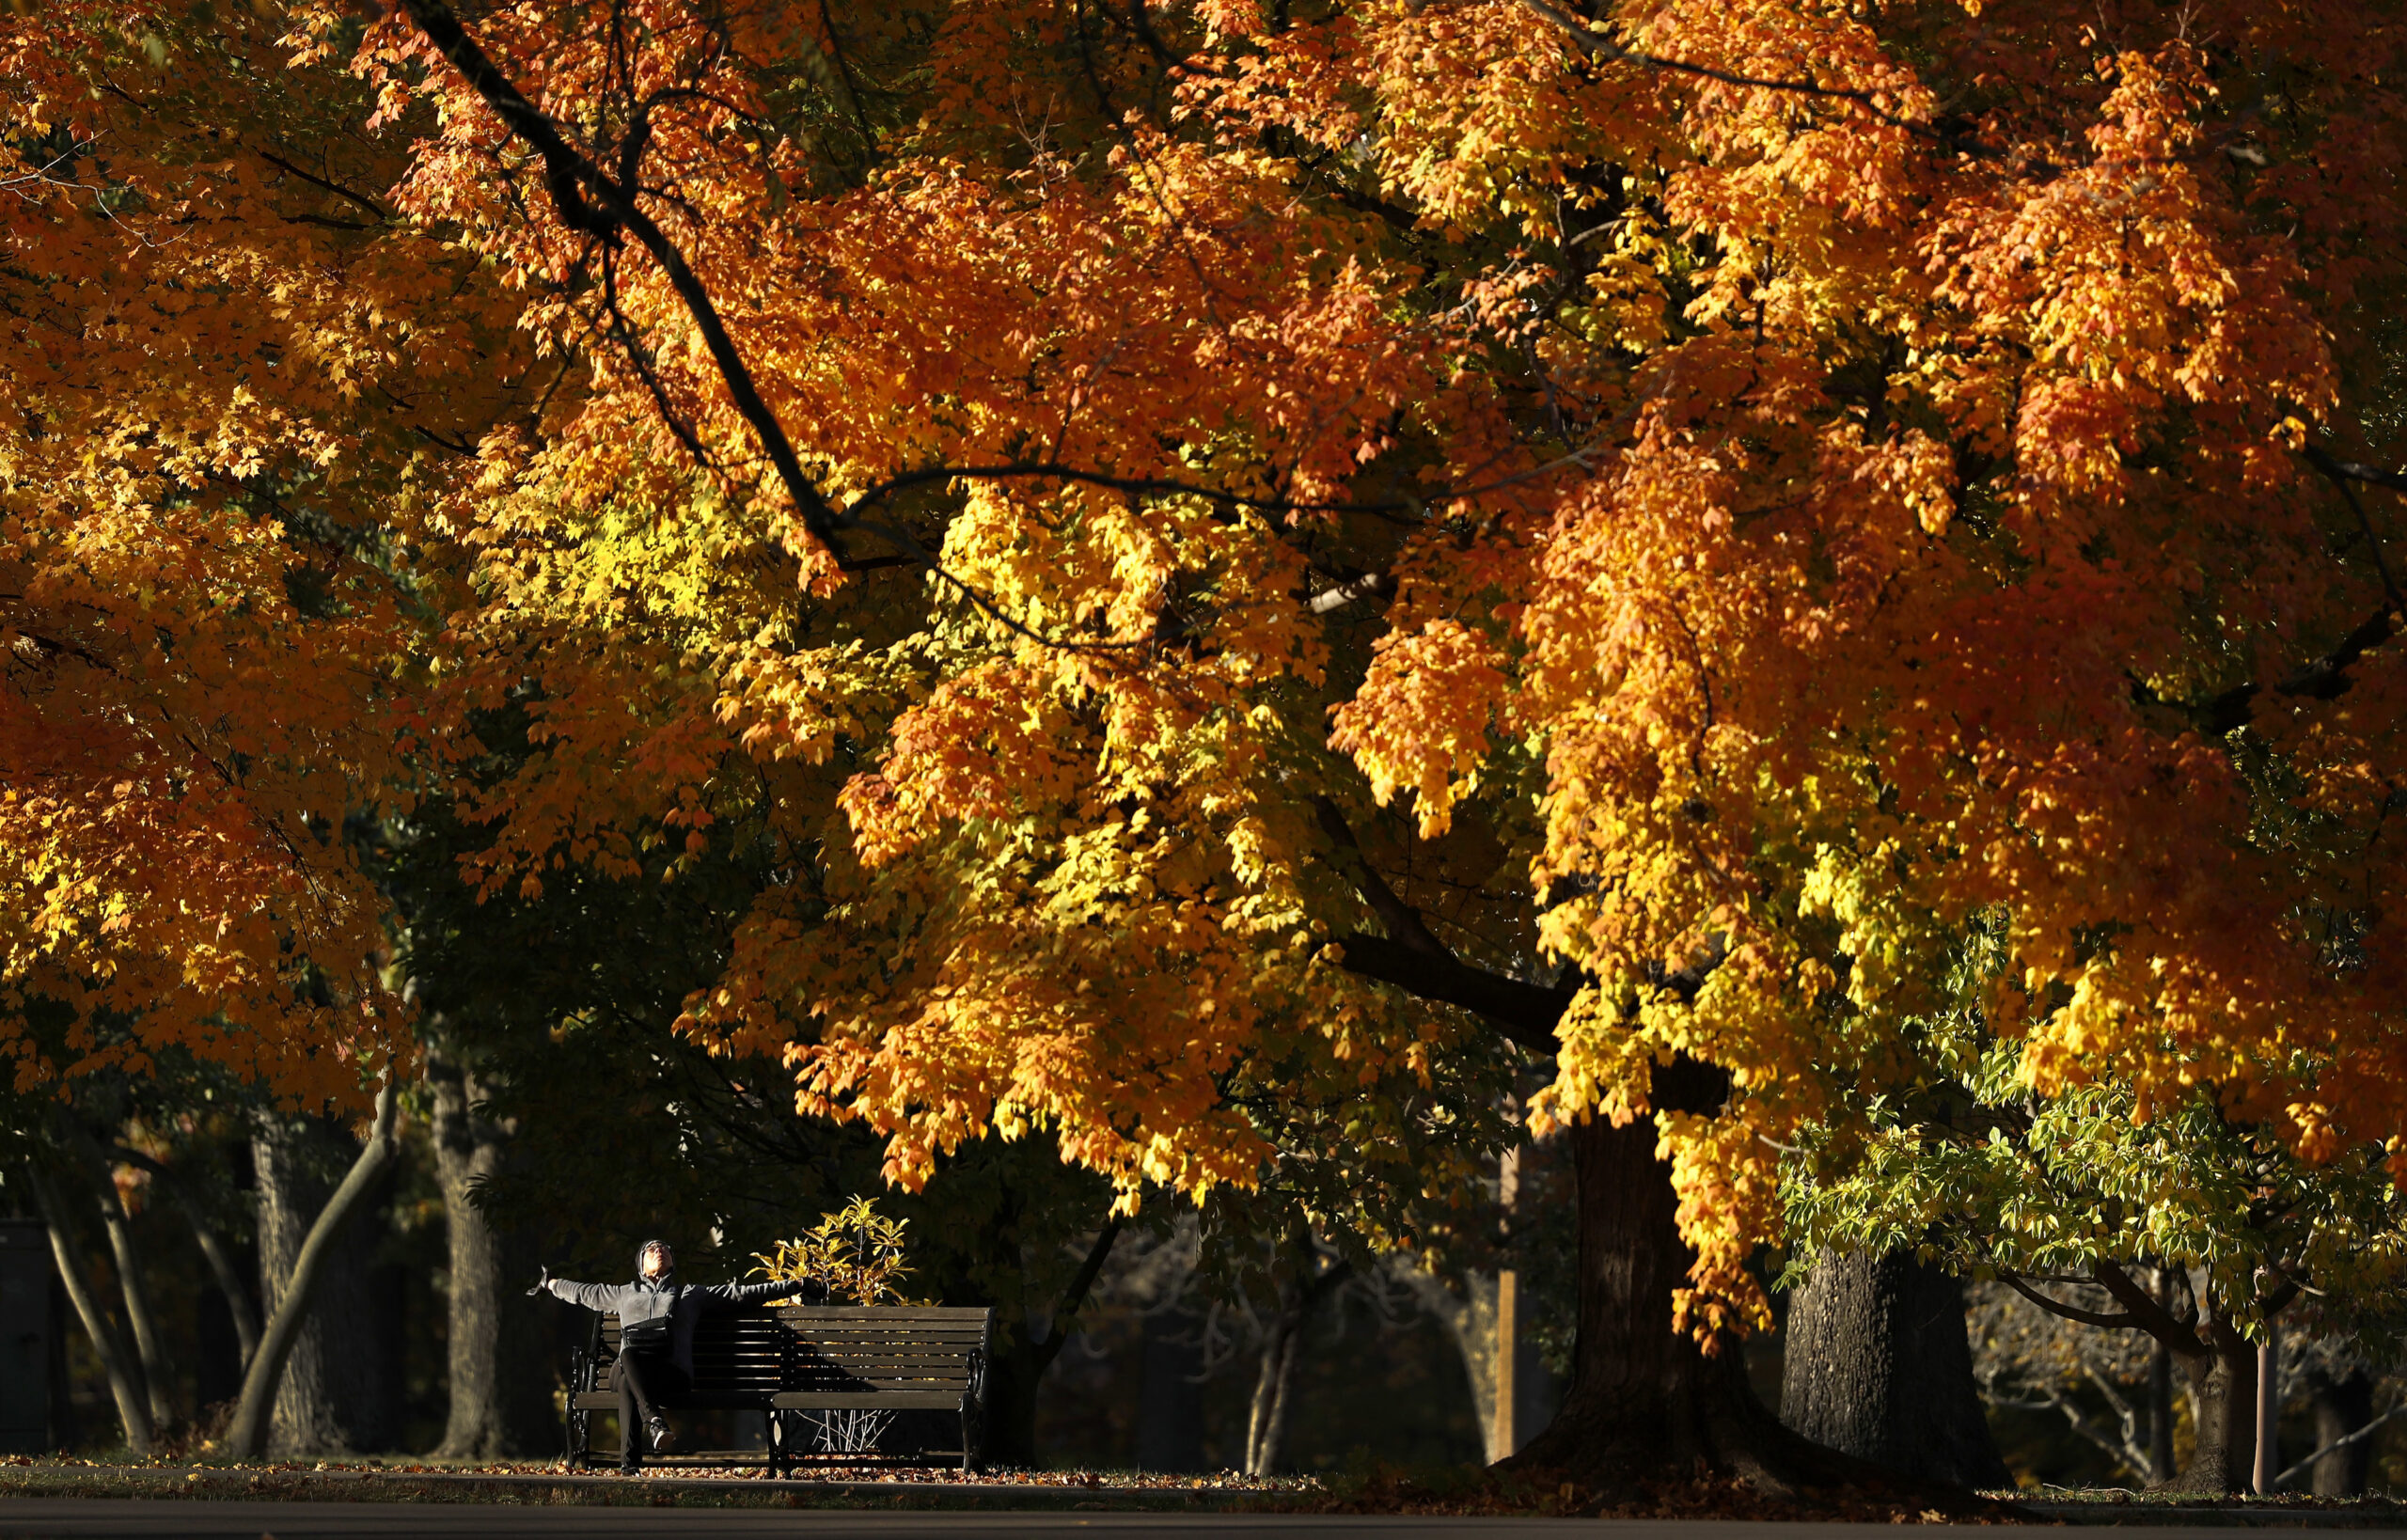 Maxine Williams stretches as she sits on a bench under trees as their leaves change color on a calm autumn day